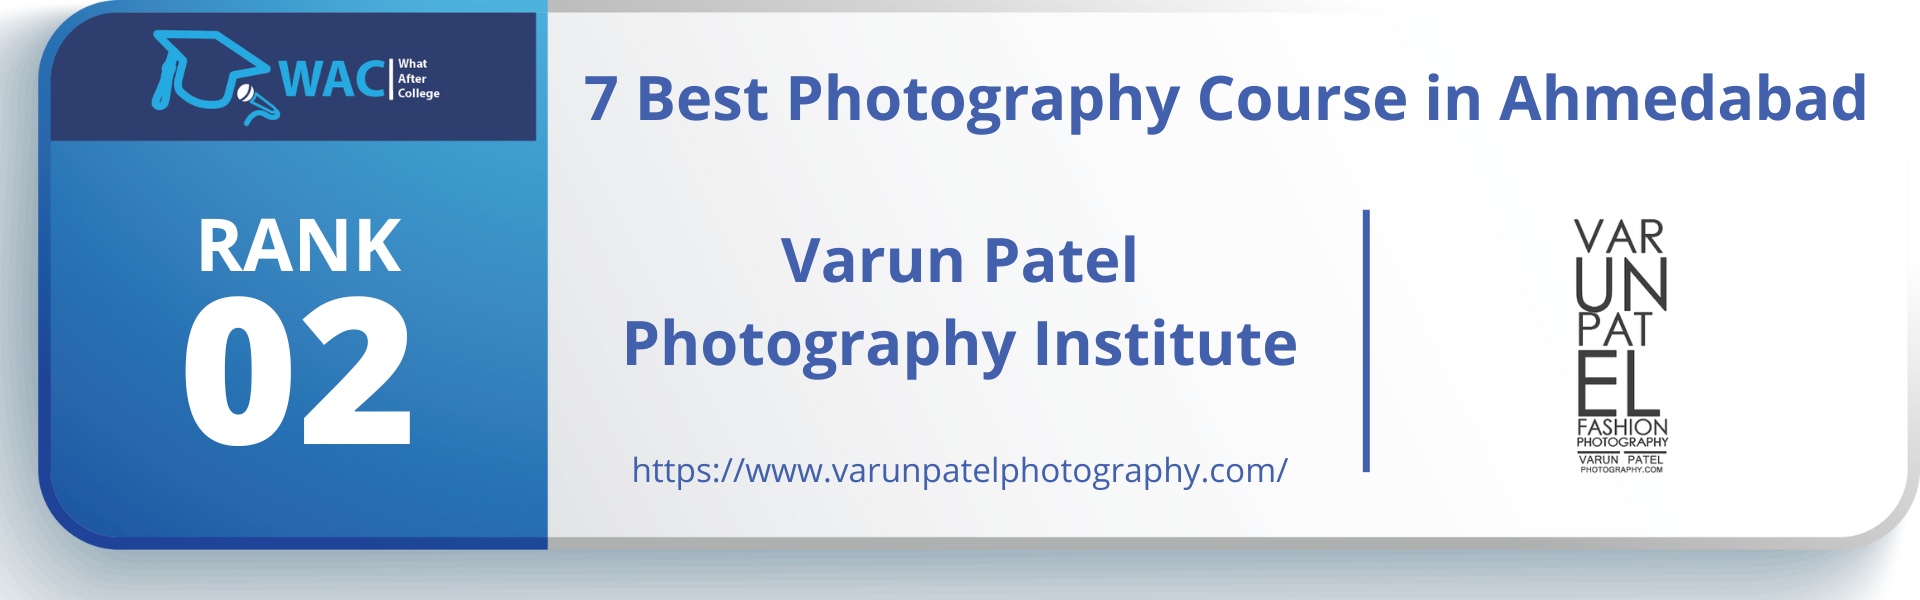 Photography Course in Ahmedabad